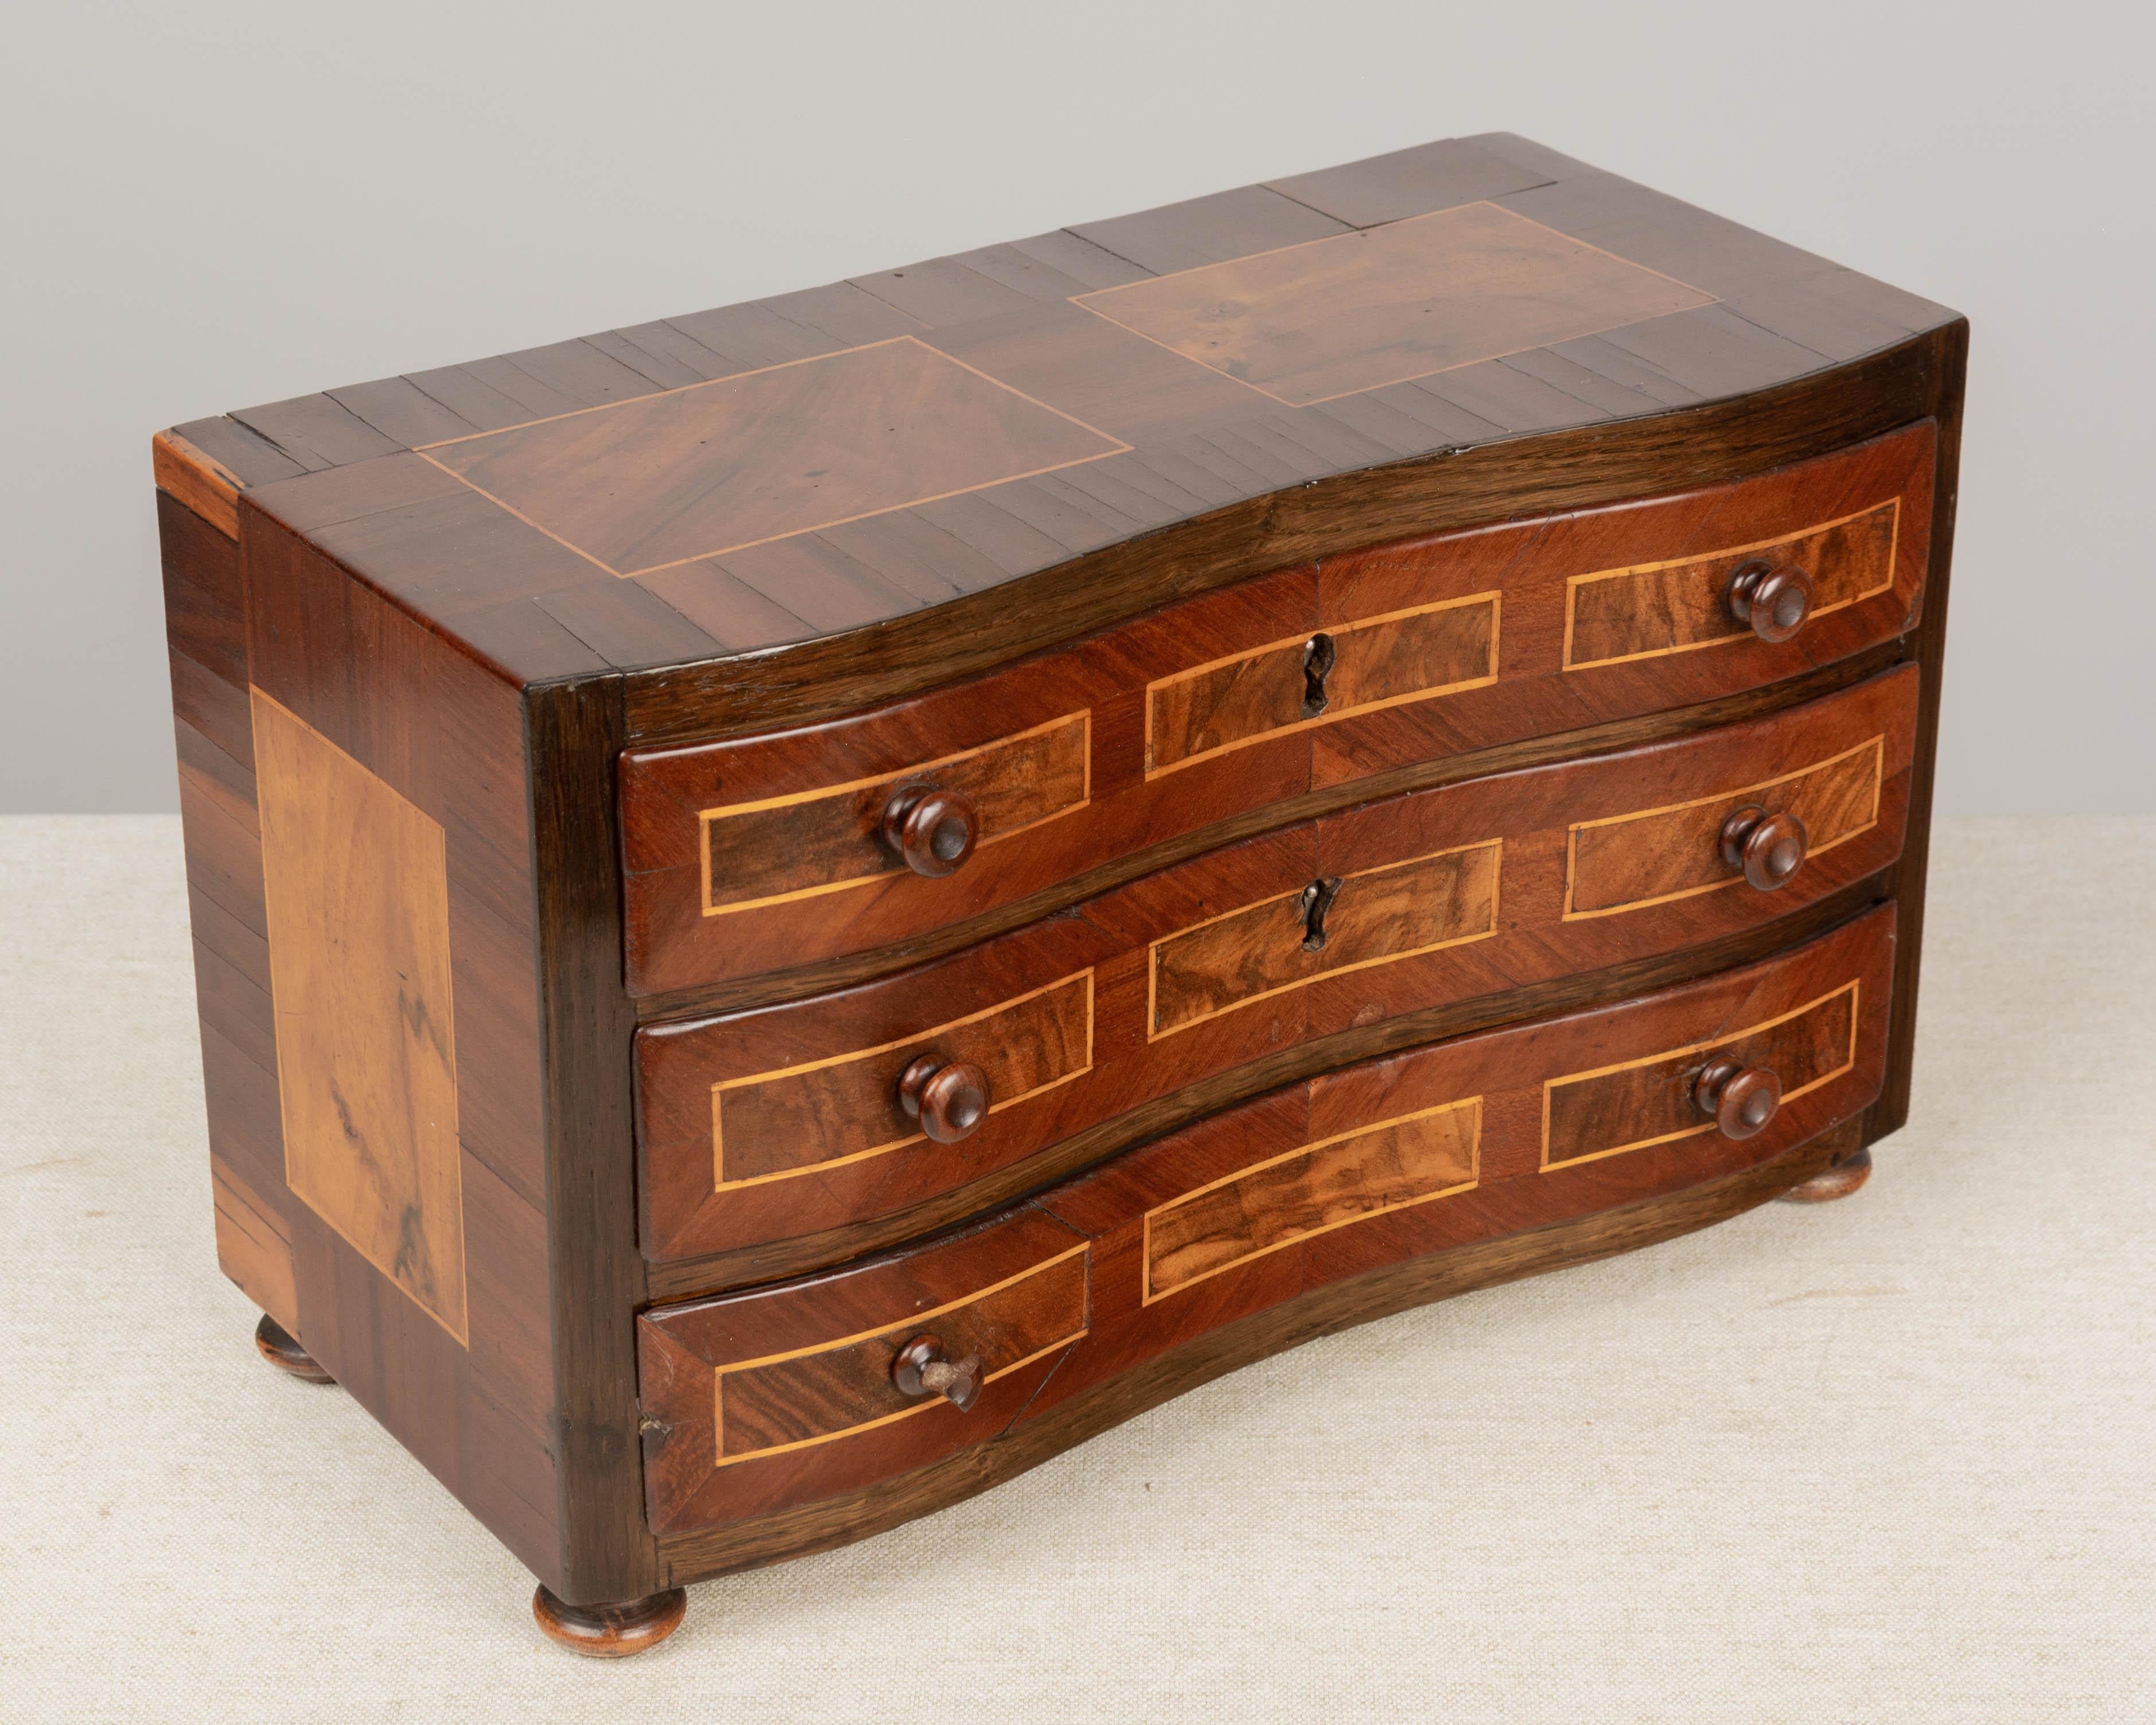 A 19th century French marquetry commode de maitrise, or miniature sample commode with serpentine front. Fine inlaid veneers of mahogany and walnut. Three dovetailed drawers with turned knobs. Mortise and tenon construction. Small loss to bottom left